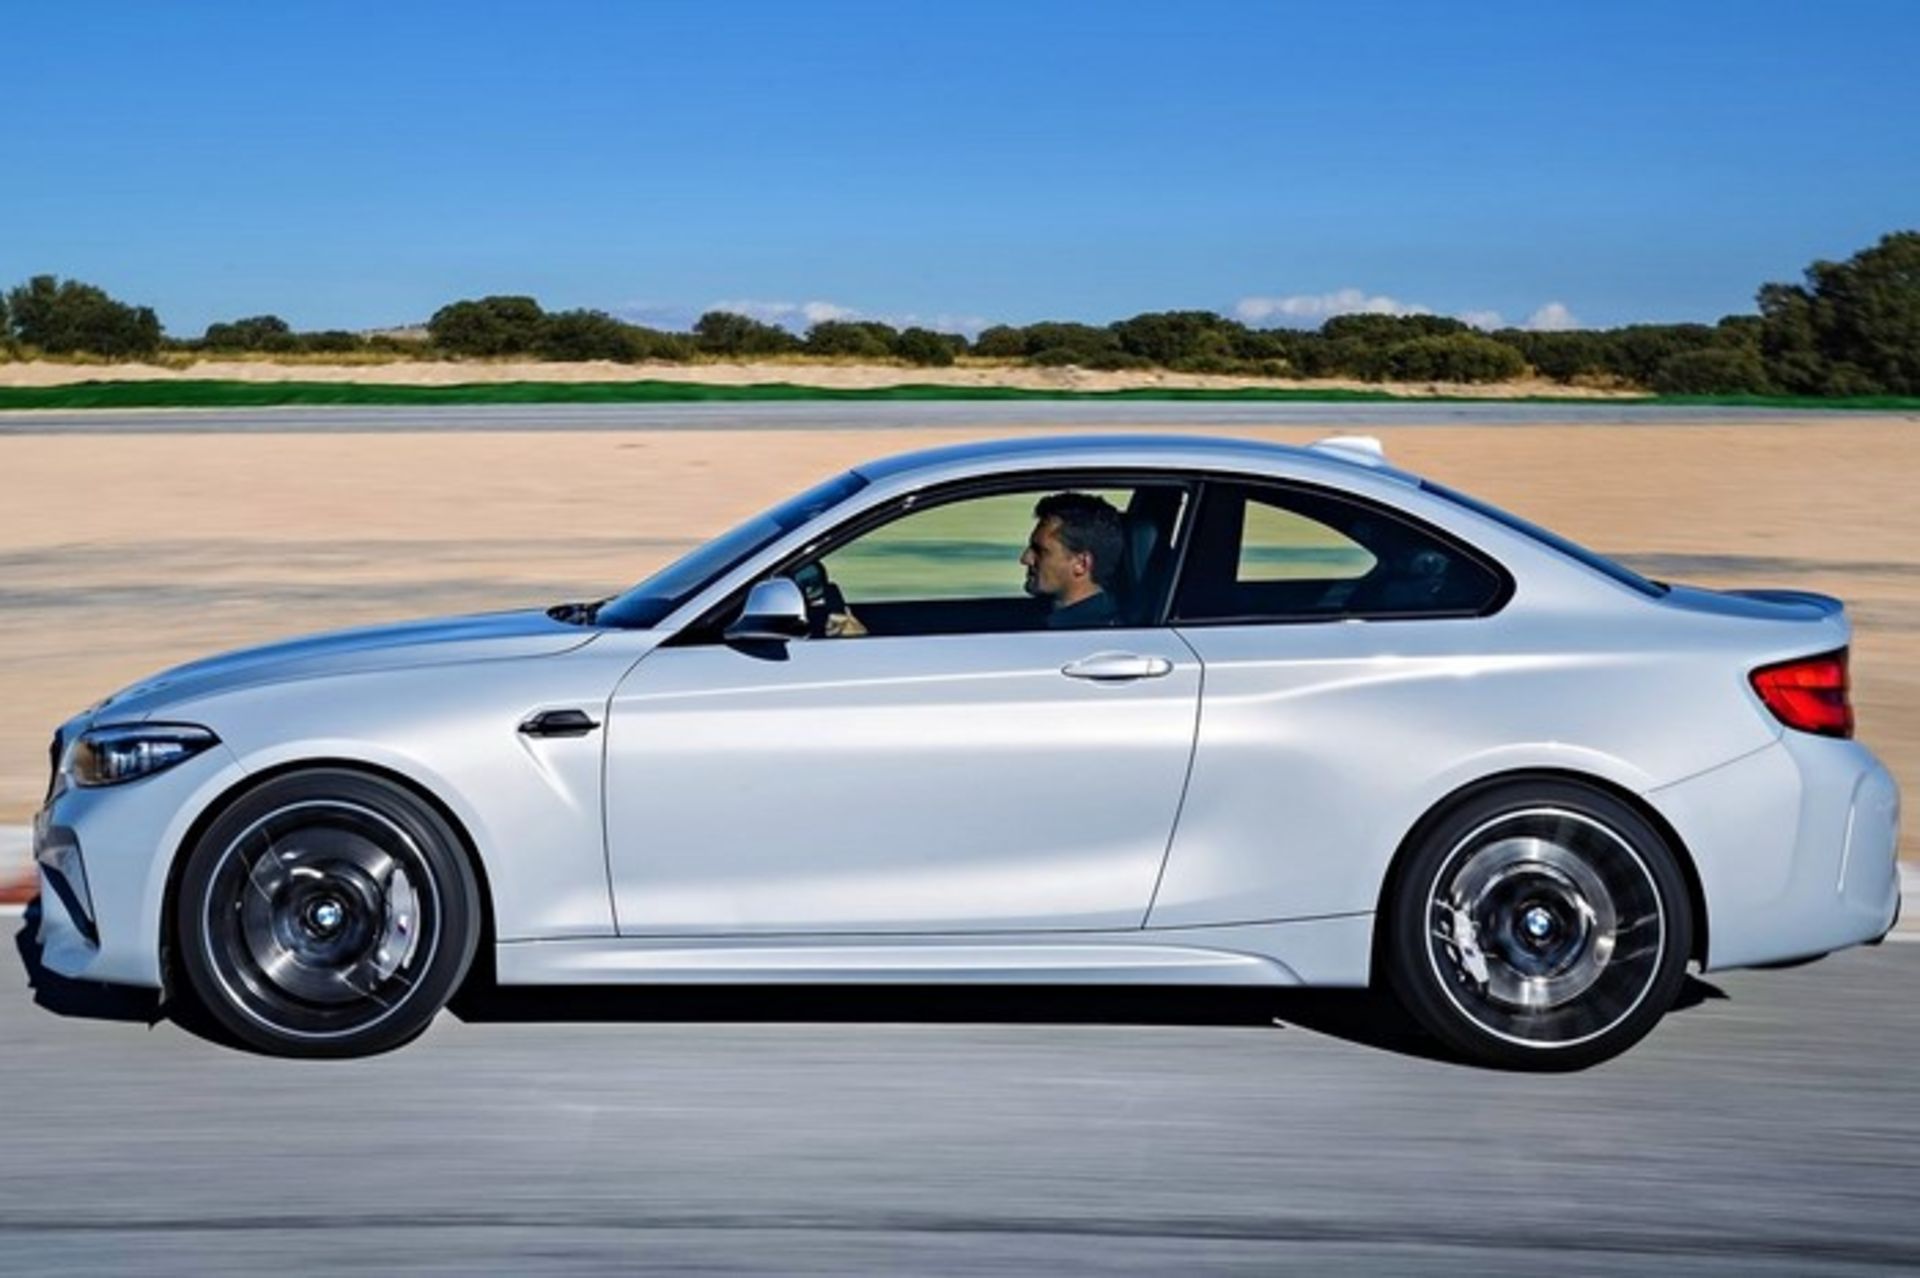 2019 m2 competition